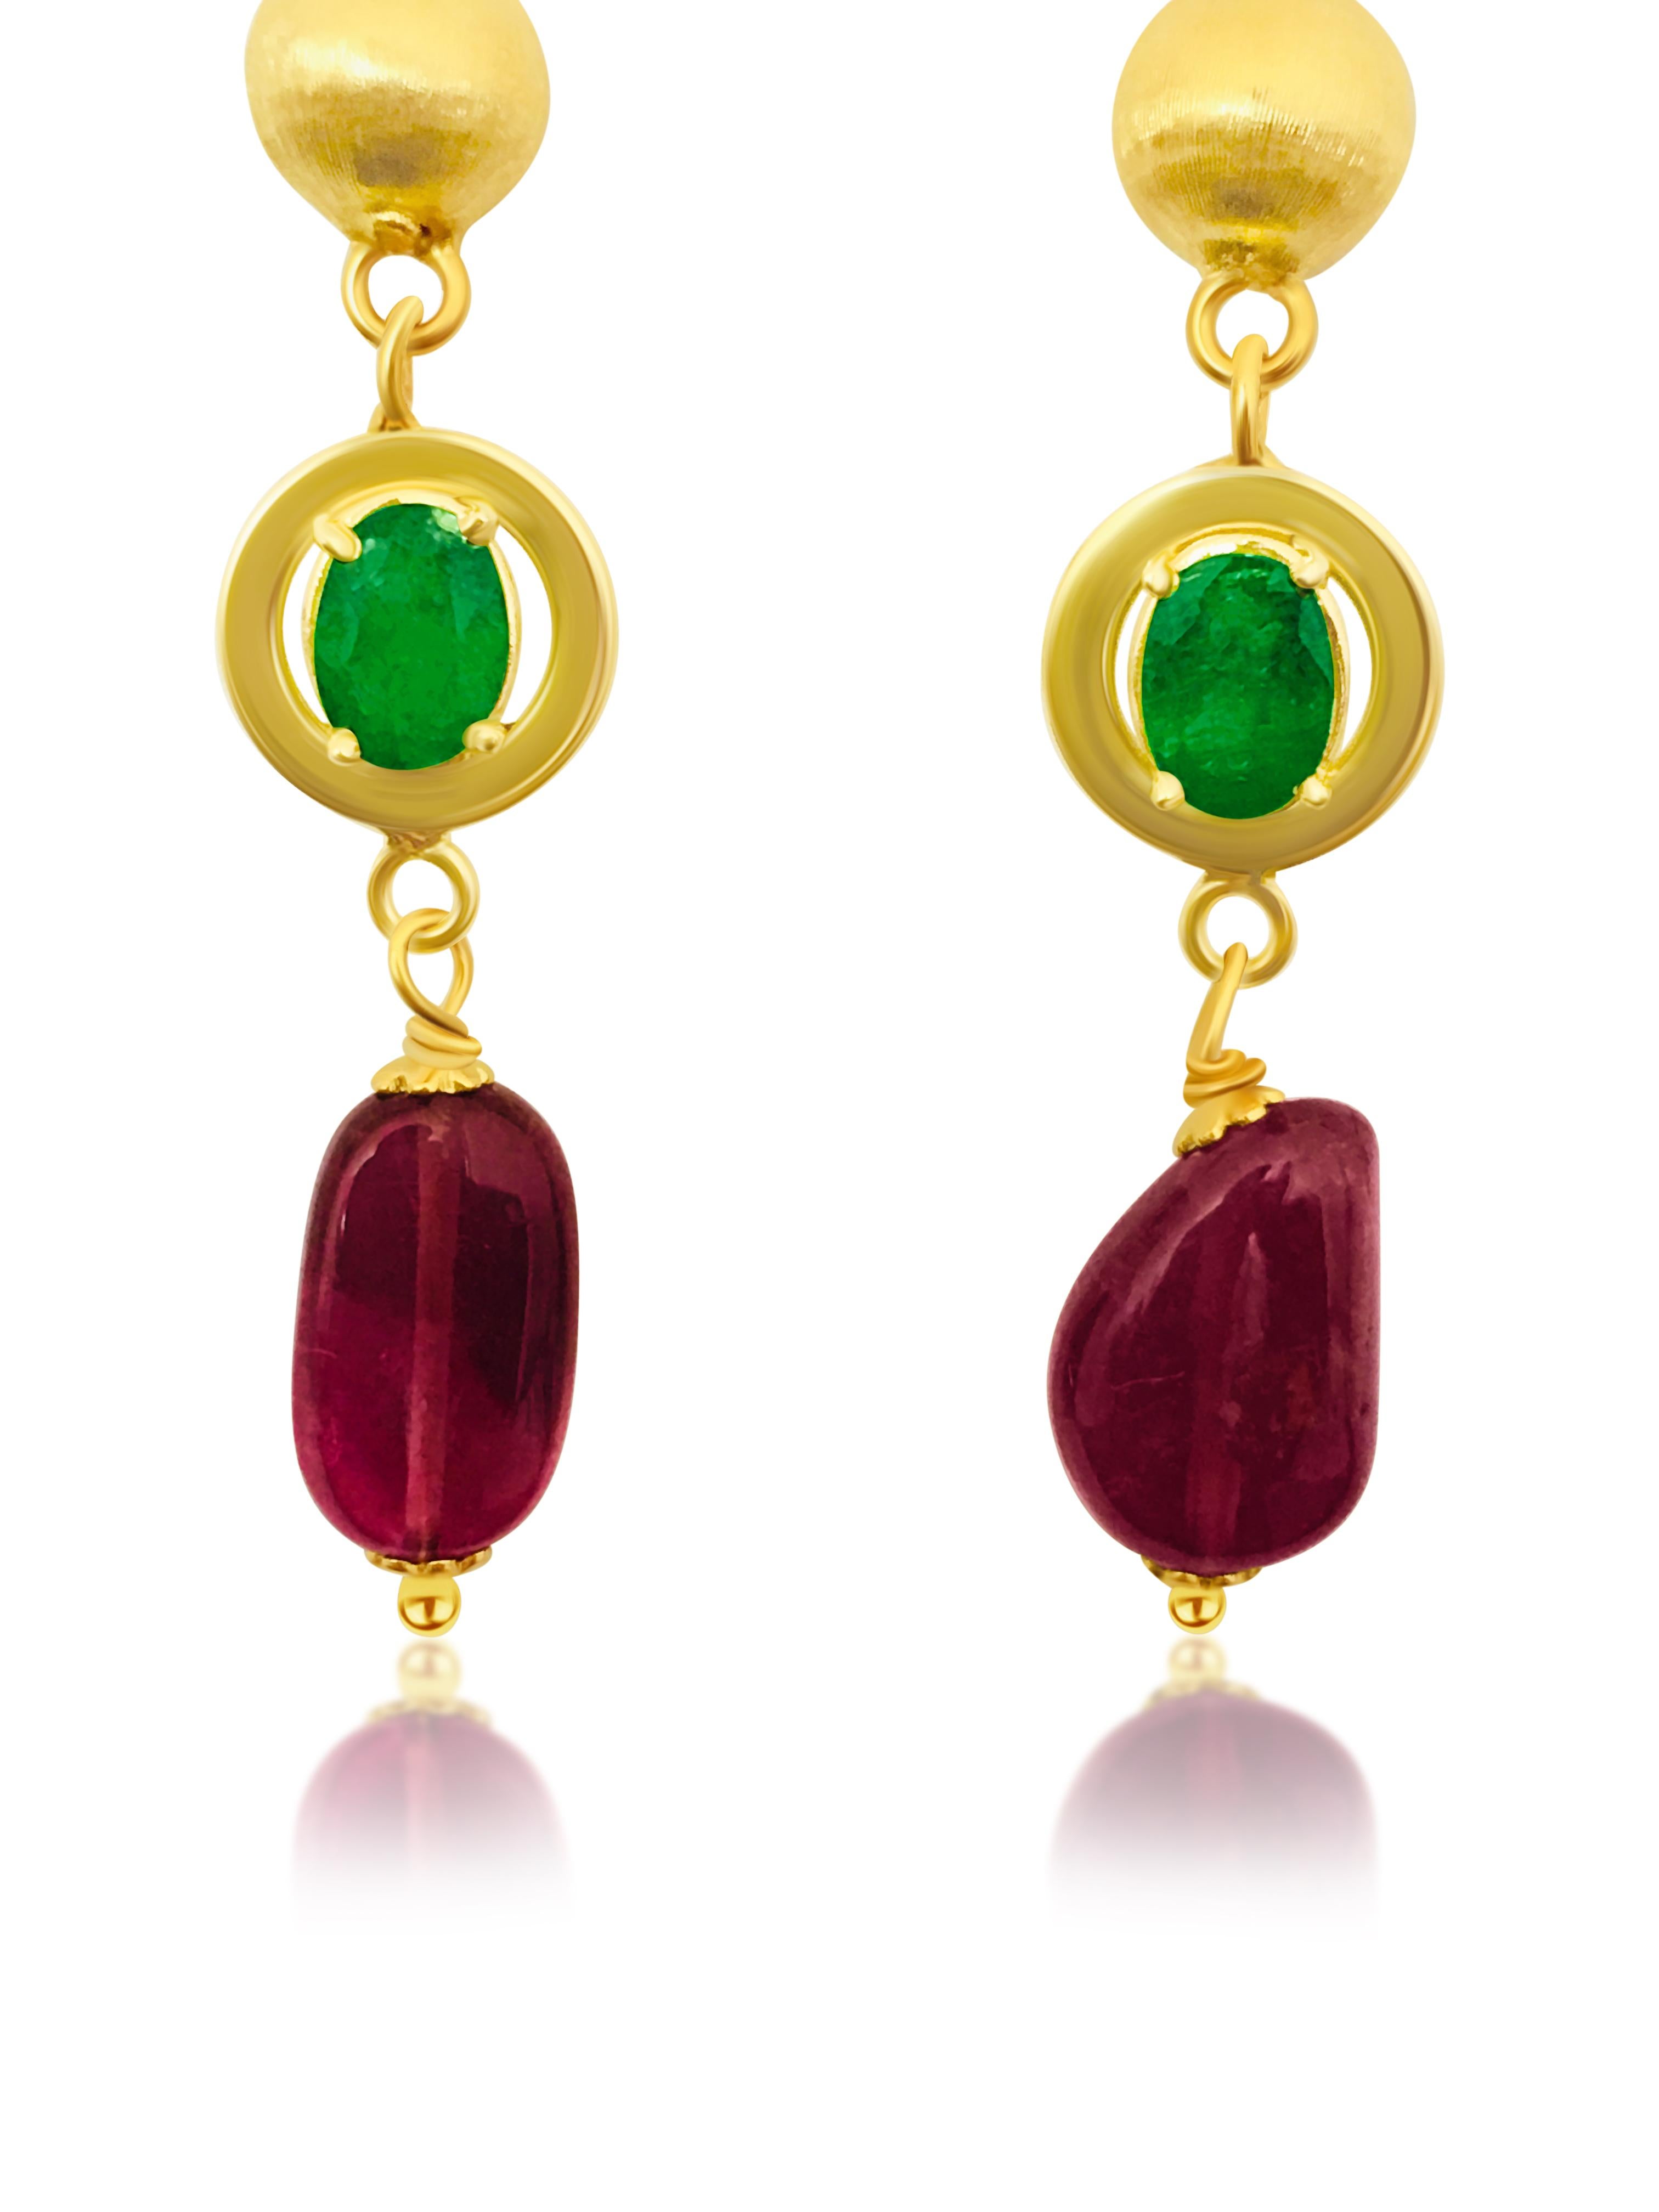 Vintage Emerald Tourmaline Gold Dangle Earrings In Excellent Condition For Sale In Miami, FL